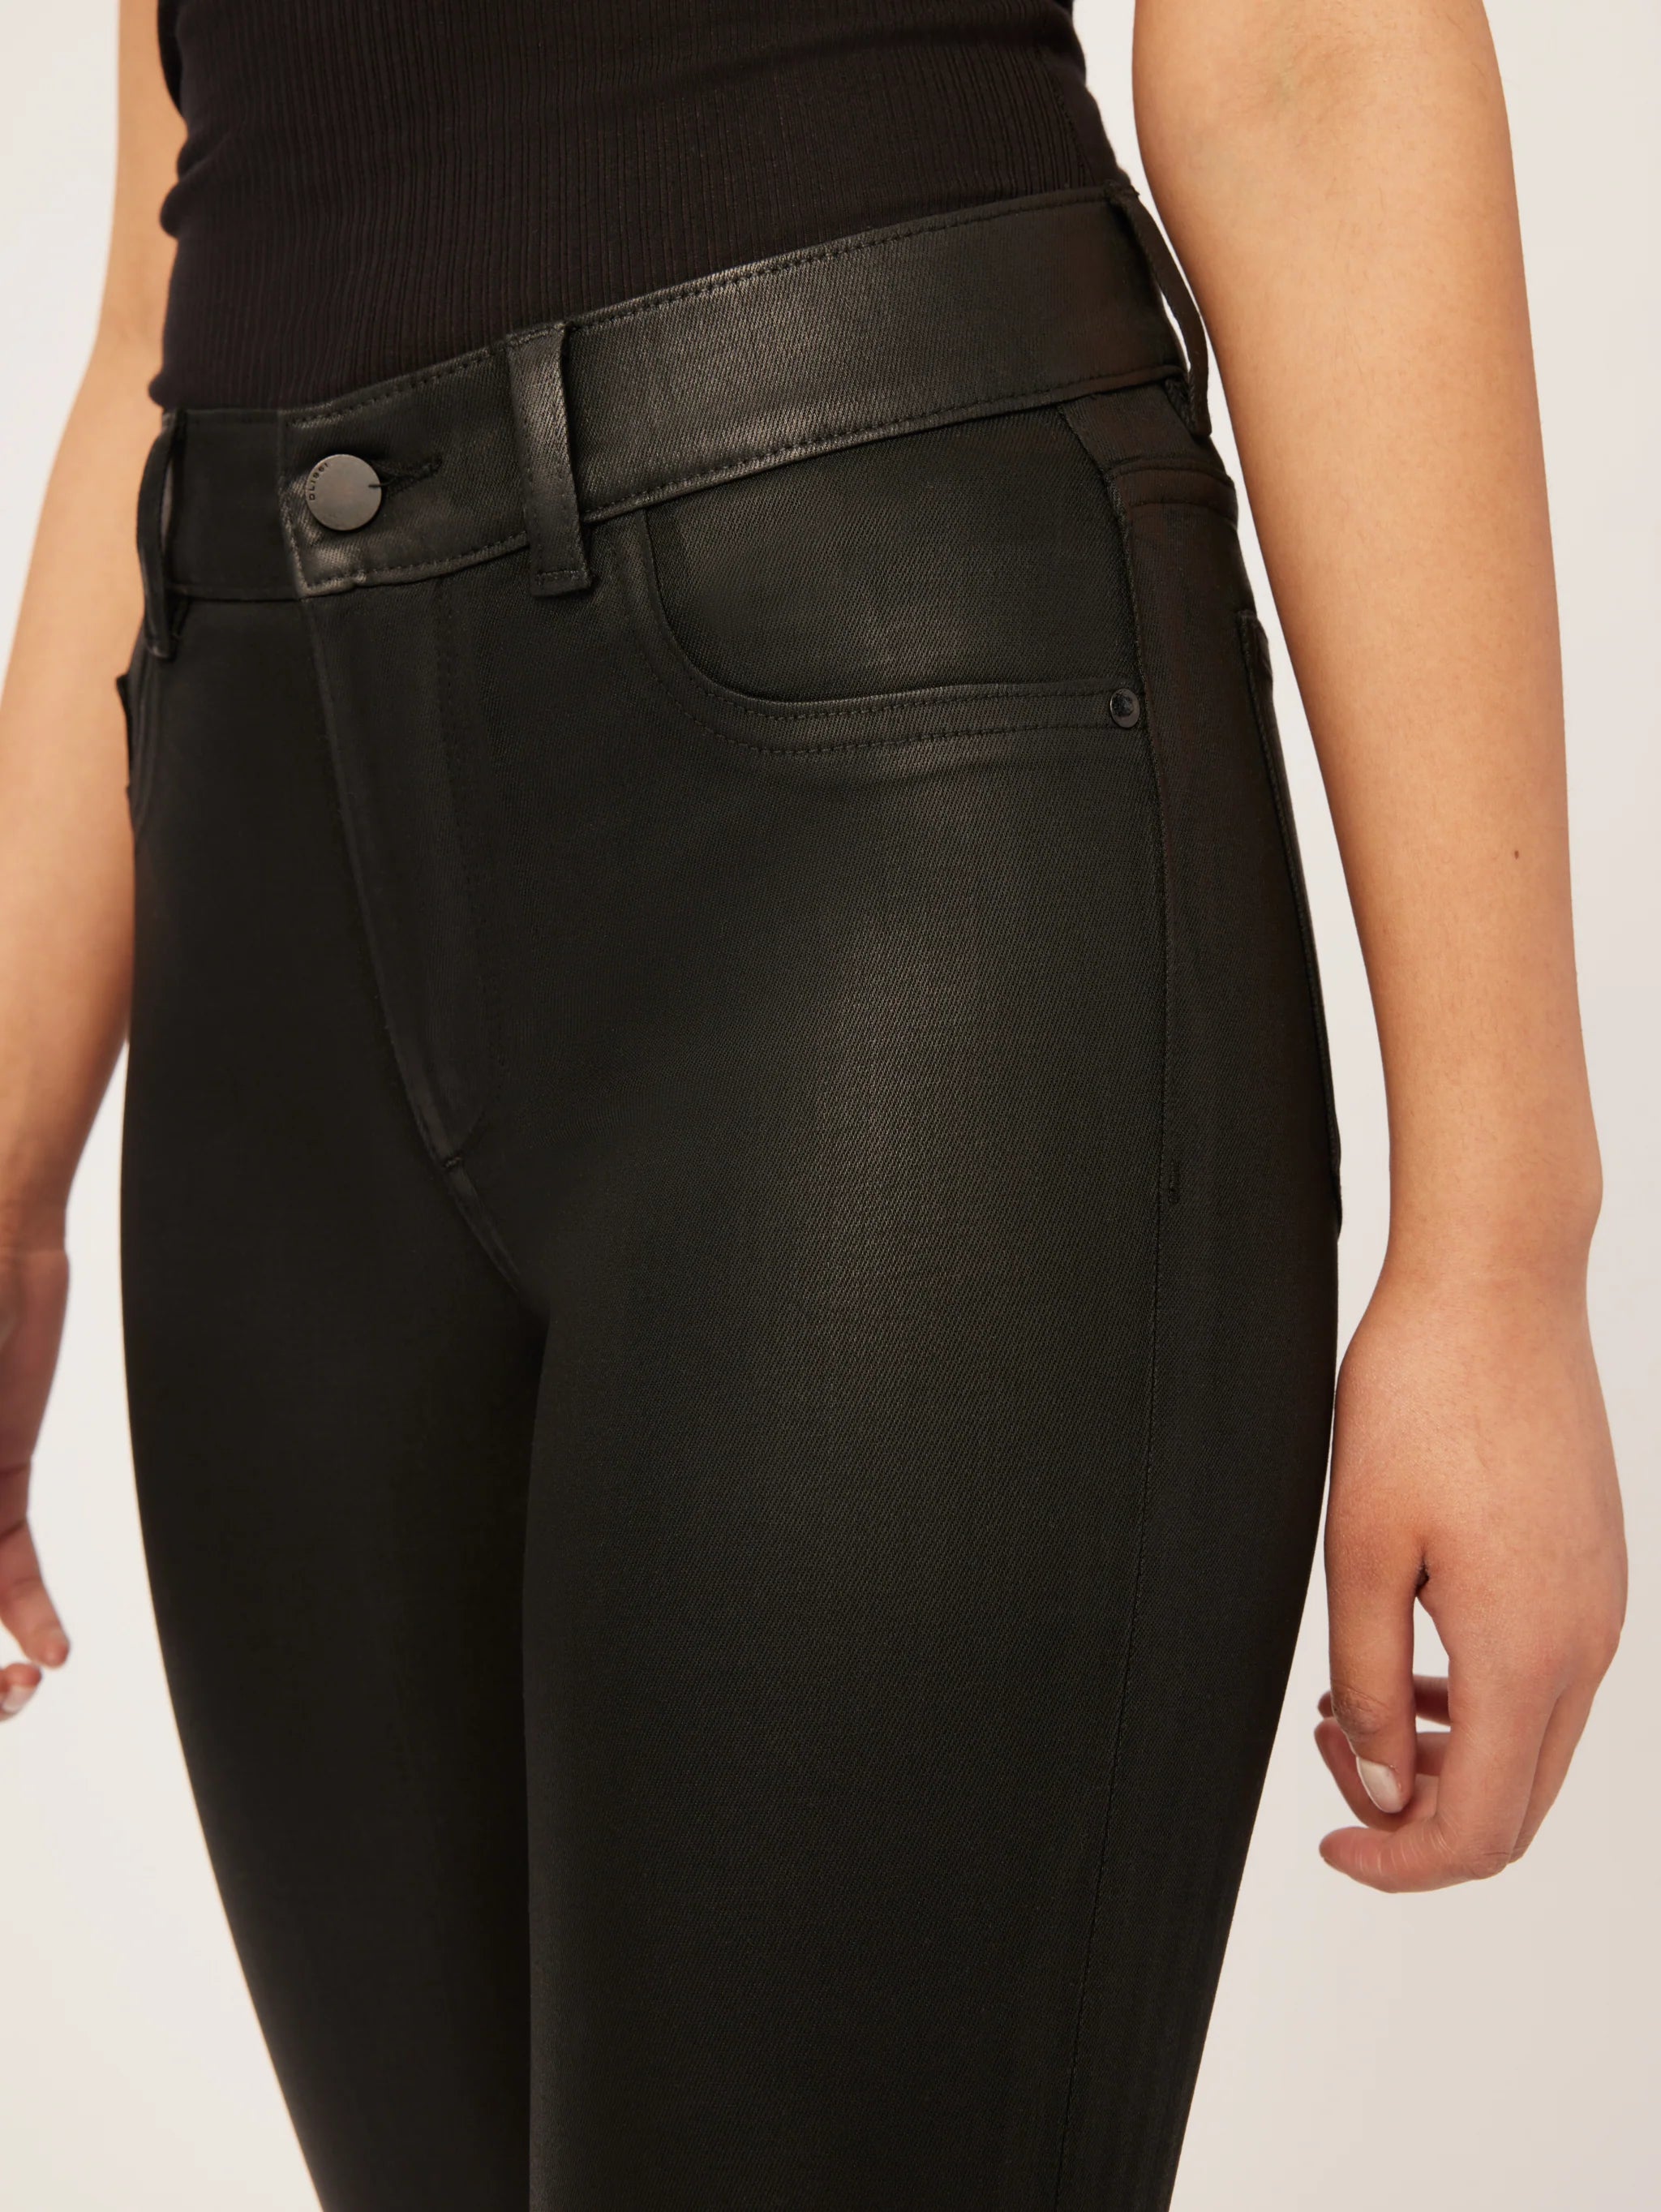 The back view of a woman wearing DL1961 Mara Straight Instasculpt Ankle - Black Coated denim pants.